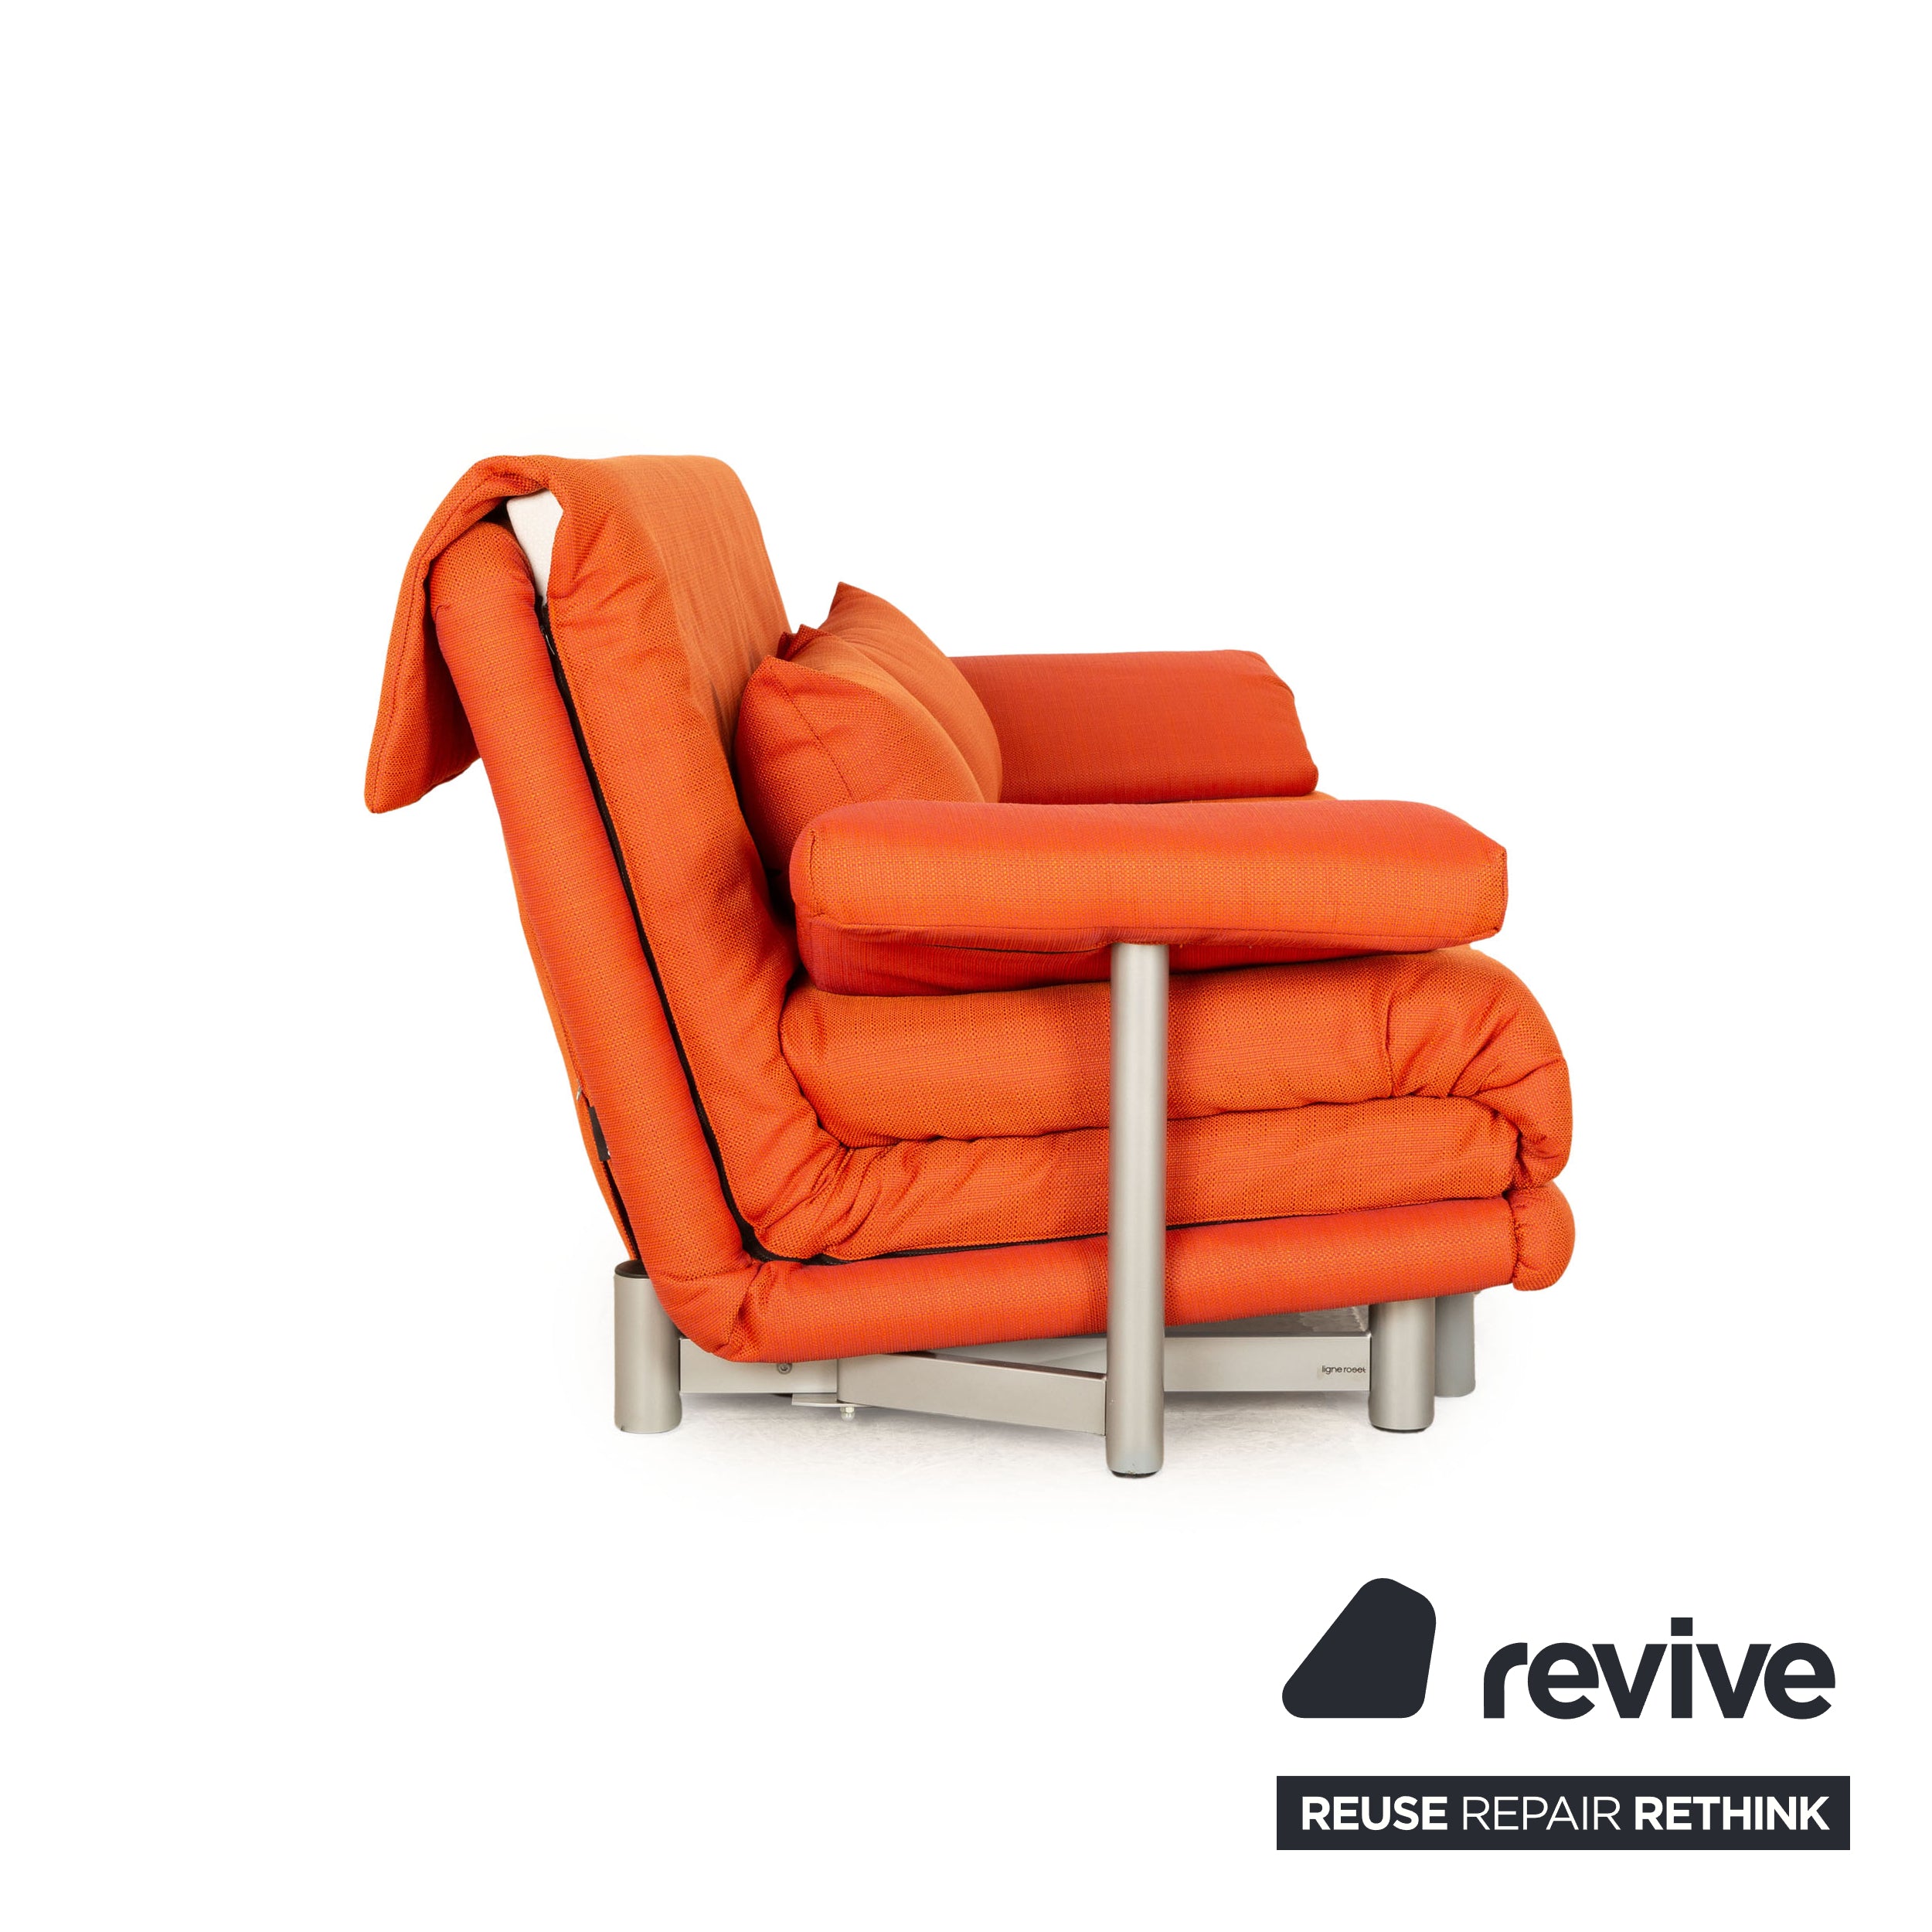 ligne roset Multy fabric three-seater orange sofa couch with armrests and BULTEX mattress sleeping function new cover